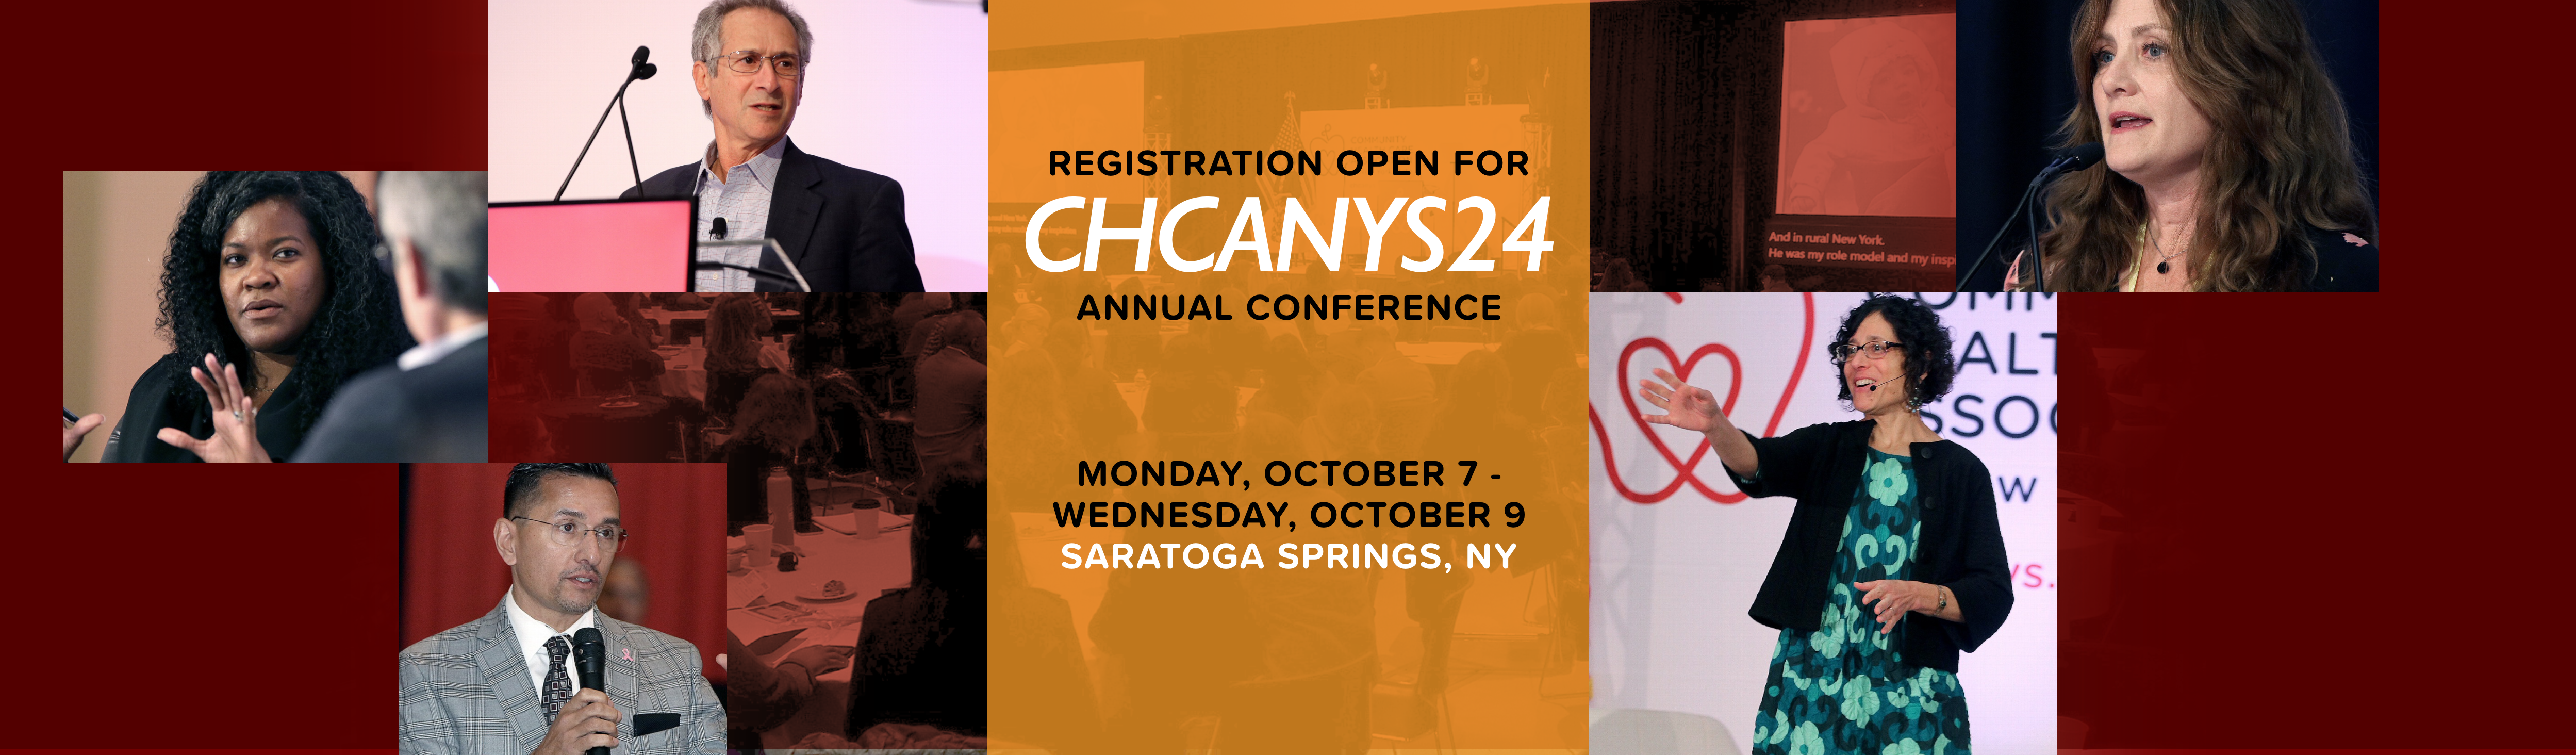 Registration Open for CHCANYS24 Annual Conference